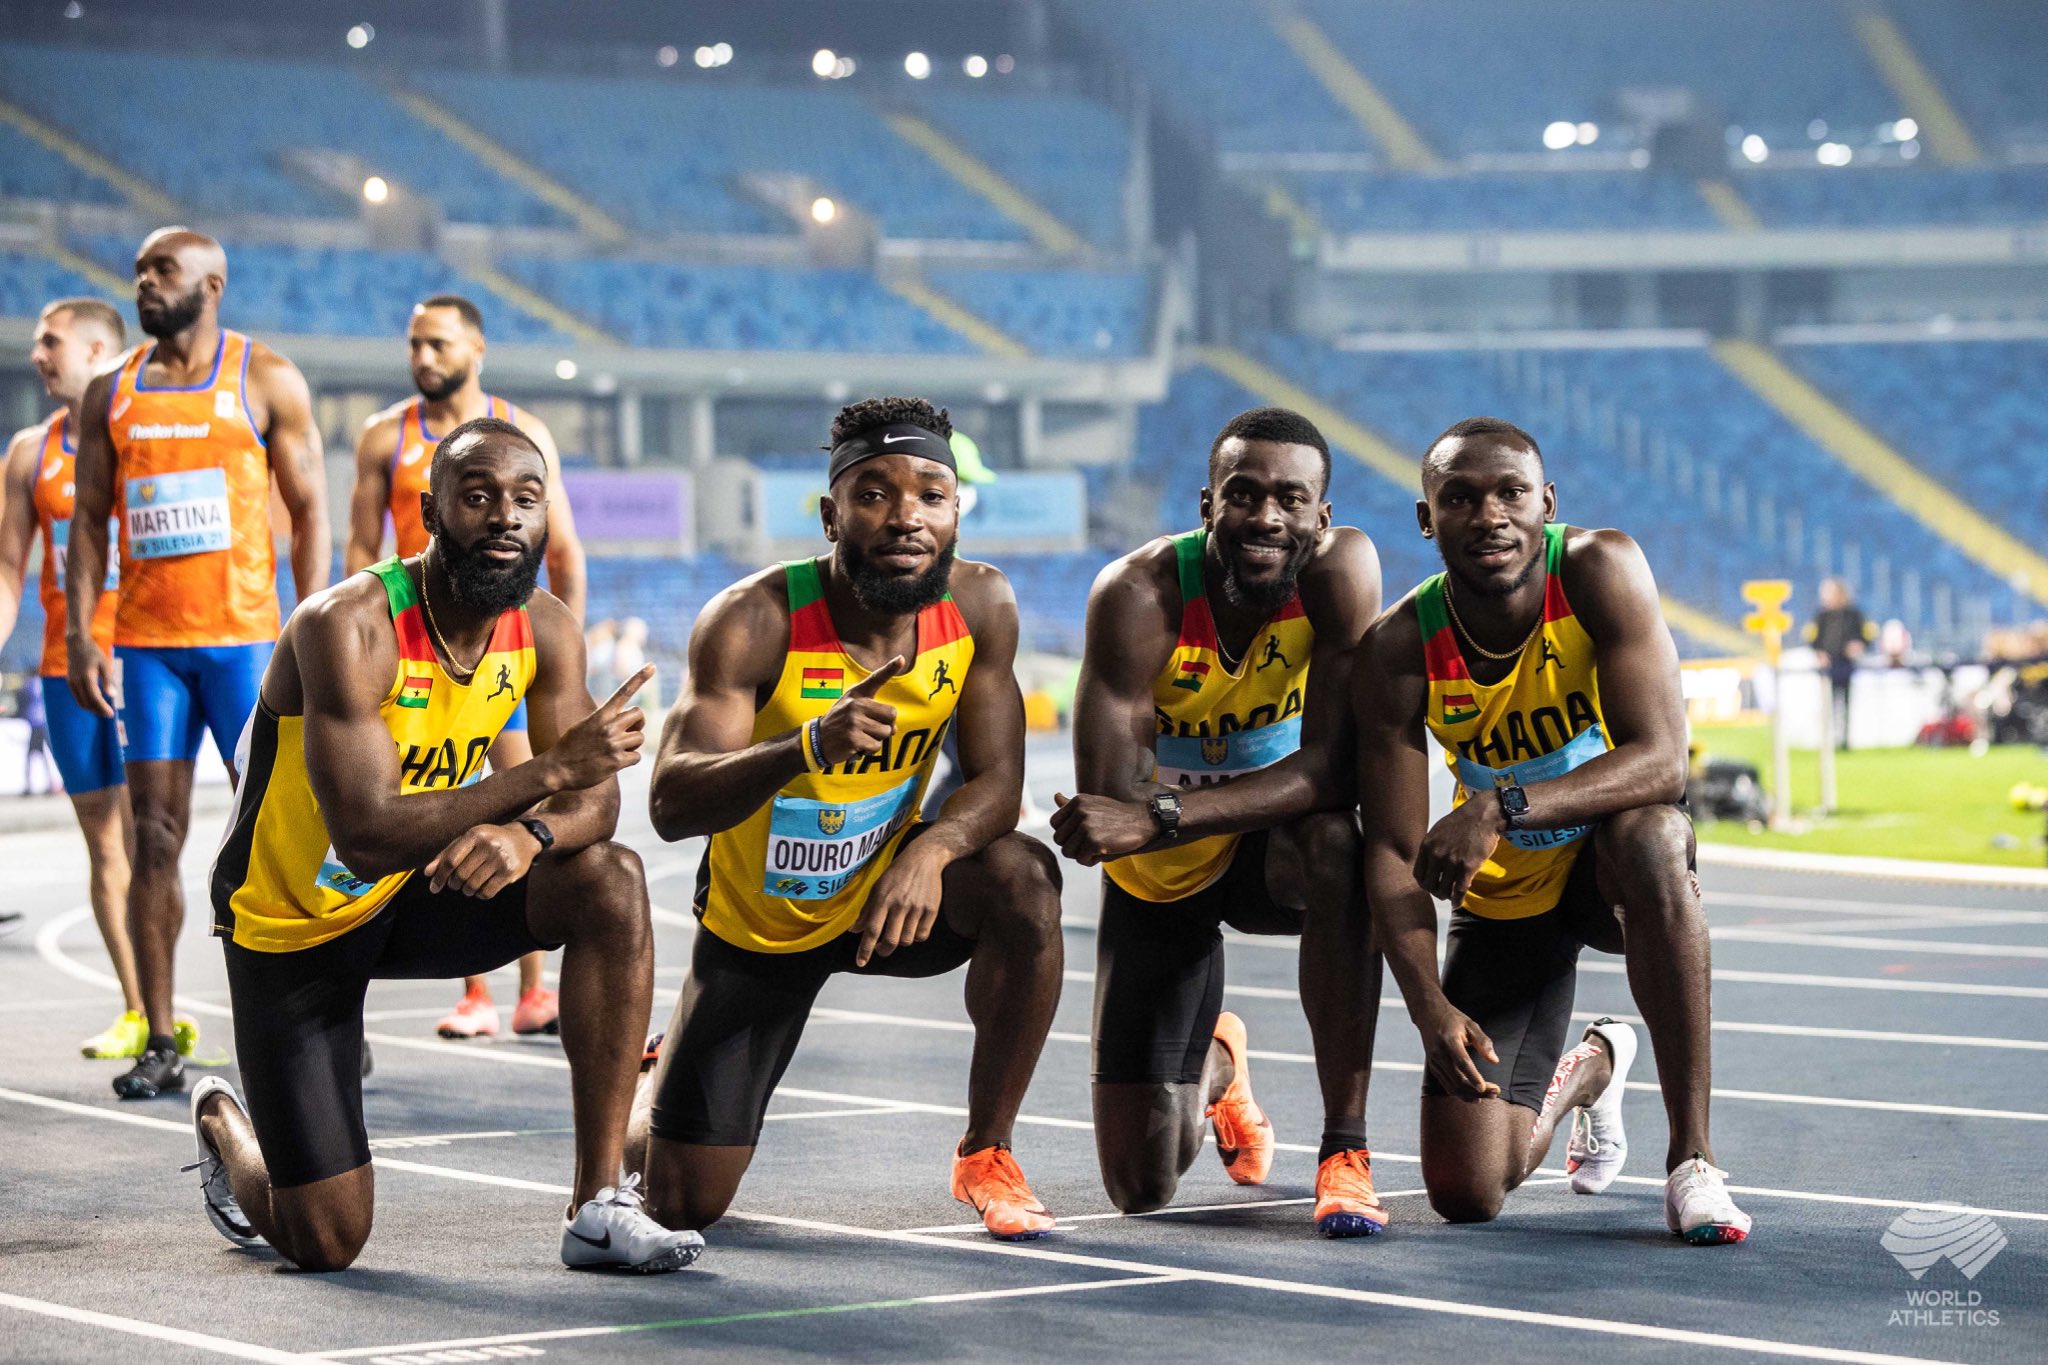 Ghana Disqualified From 4x100m Relays World Finals